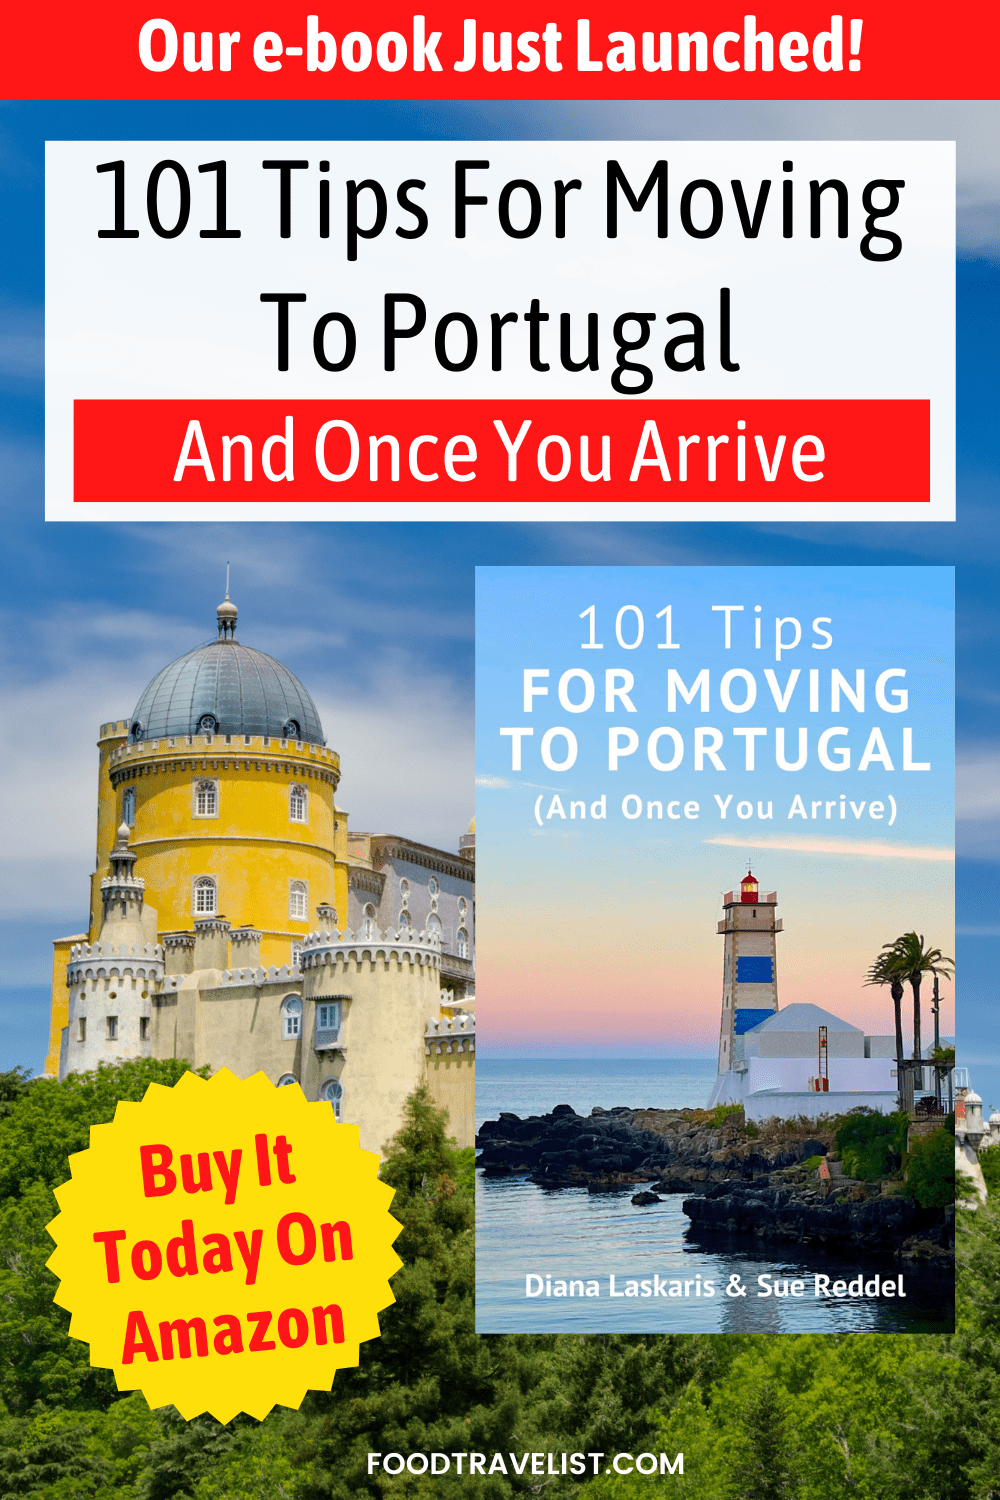 101 Tips For Moving to Portugal Pin